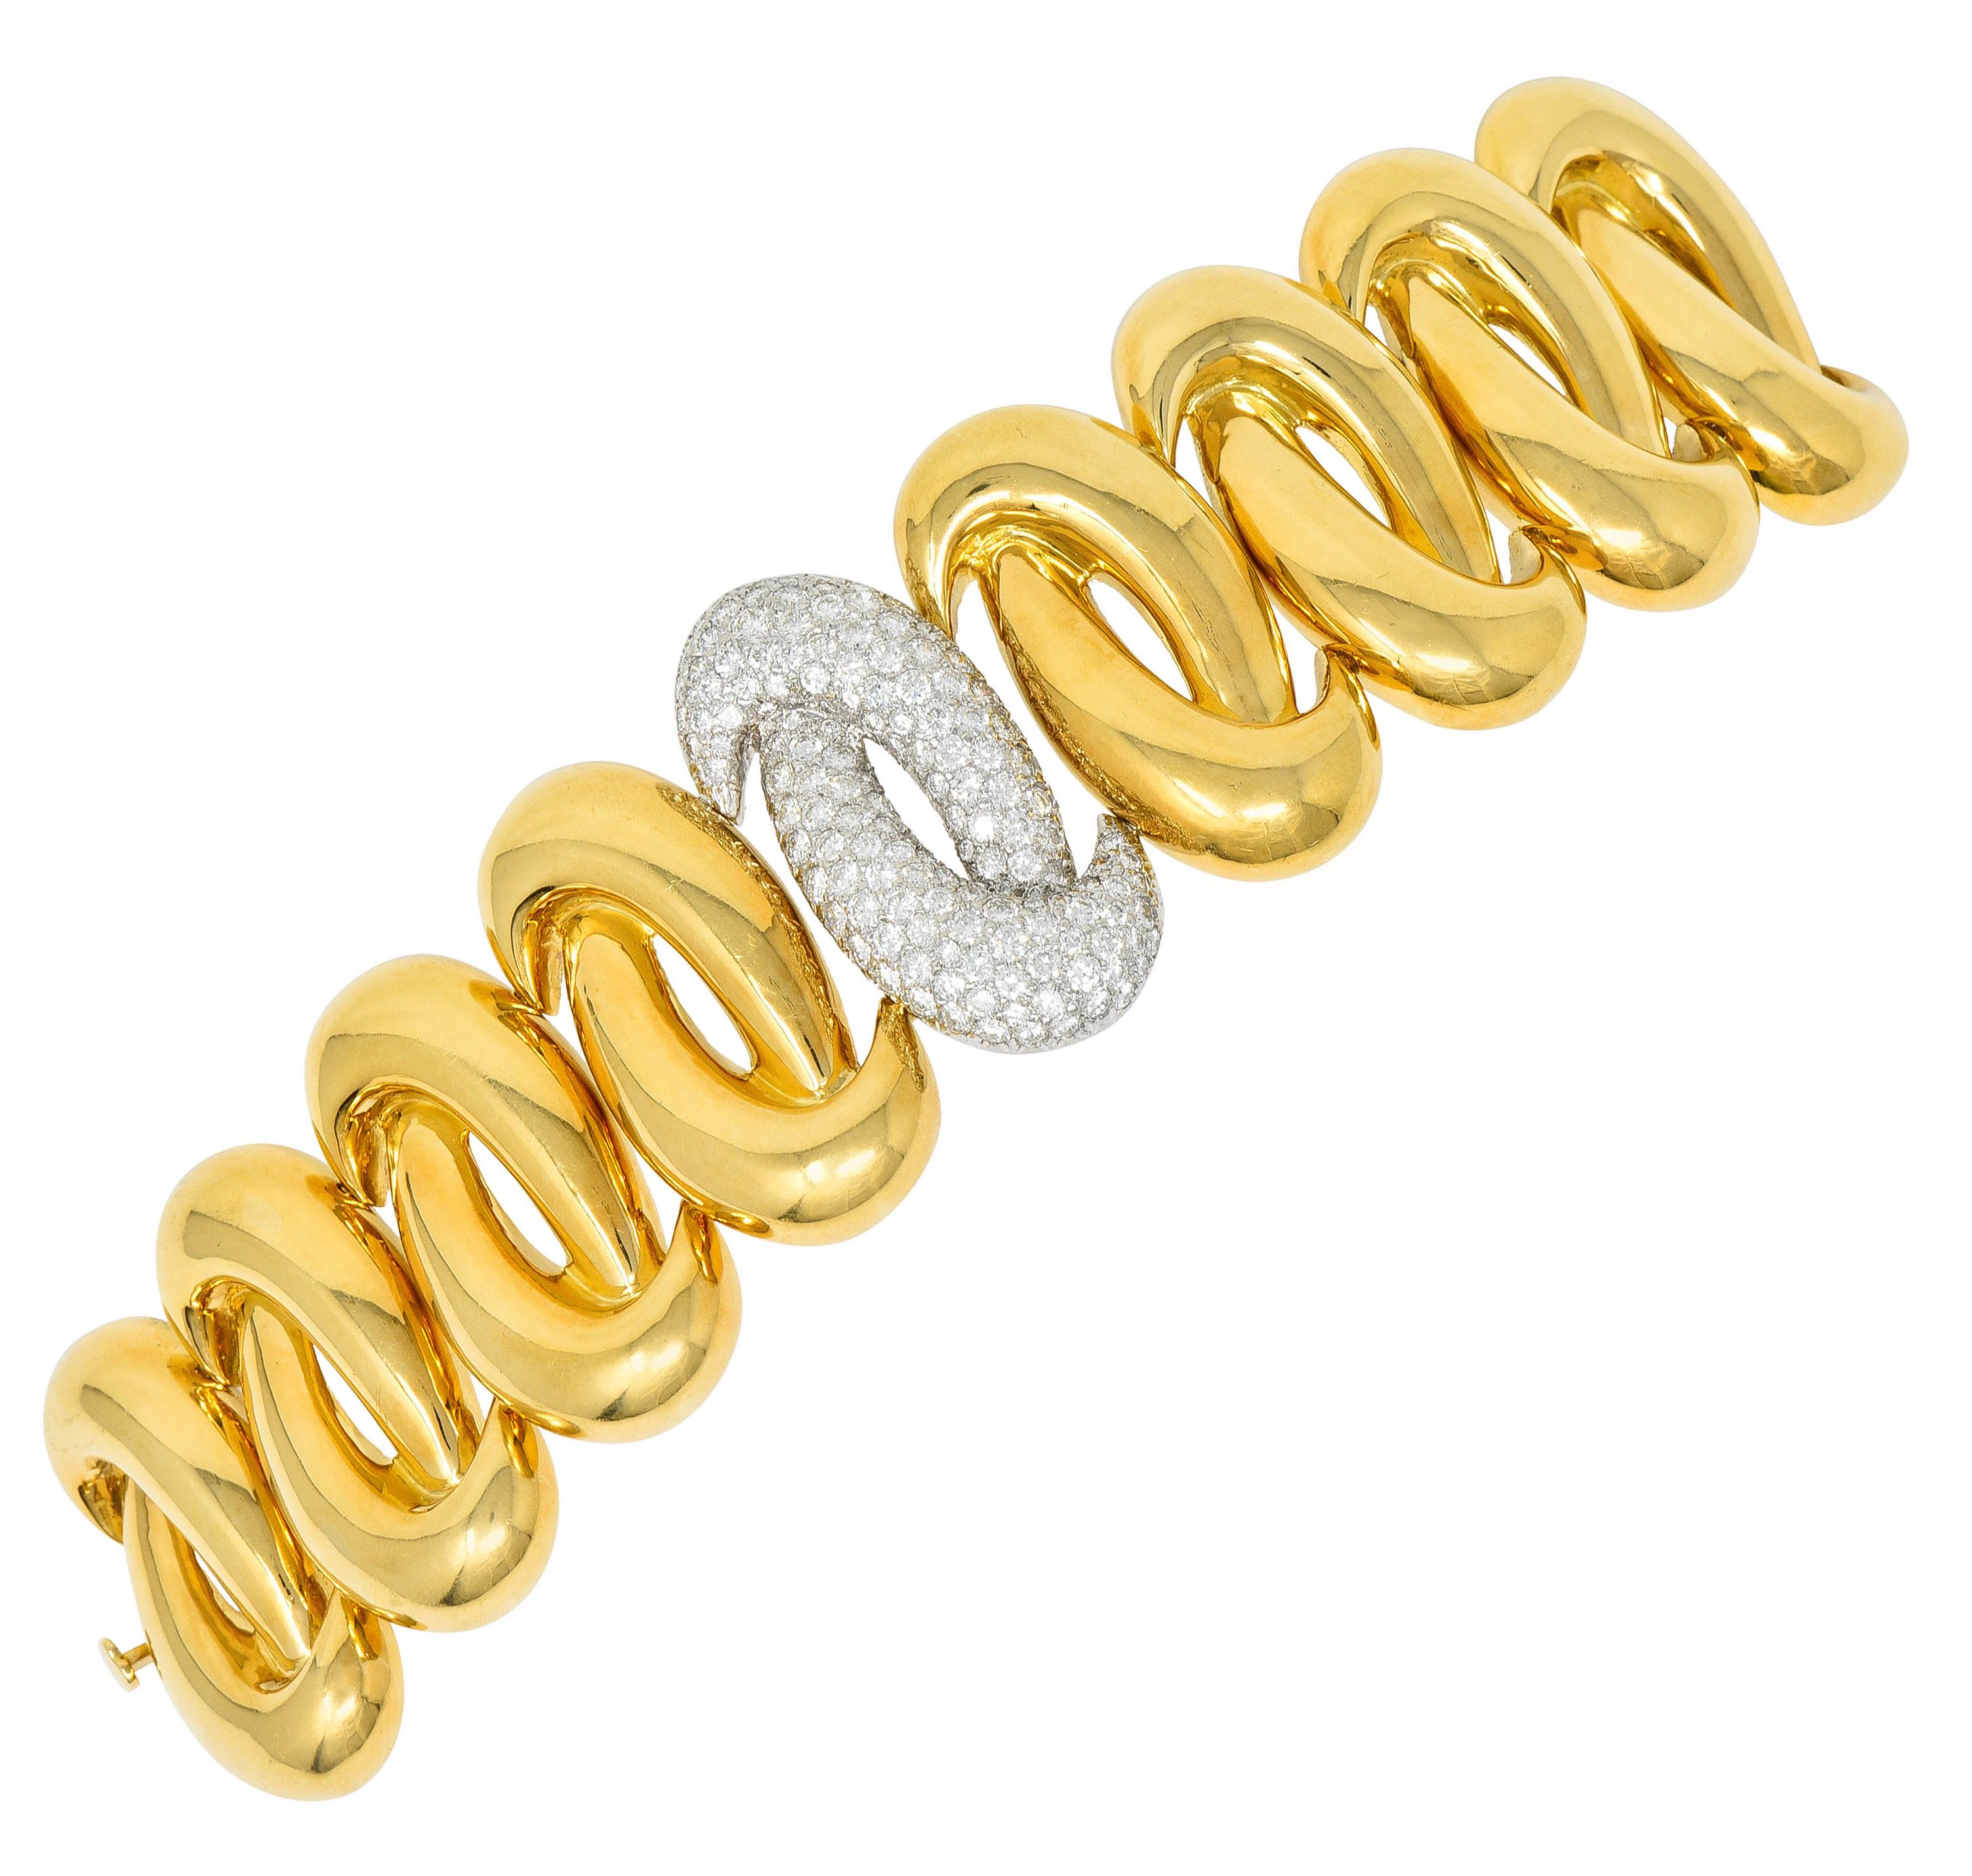 Statement bracelet is comprised of gleaming gold knot motif links

While centering a white gold station pavè set throughout by round brilliant cut diamonds

Weighing in total approximately 7.50 carats with F to G color and VS to SI